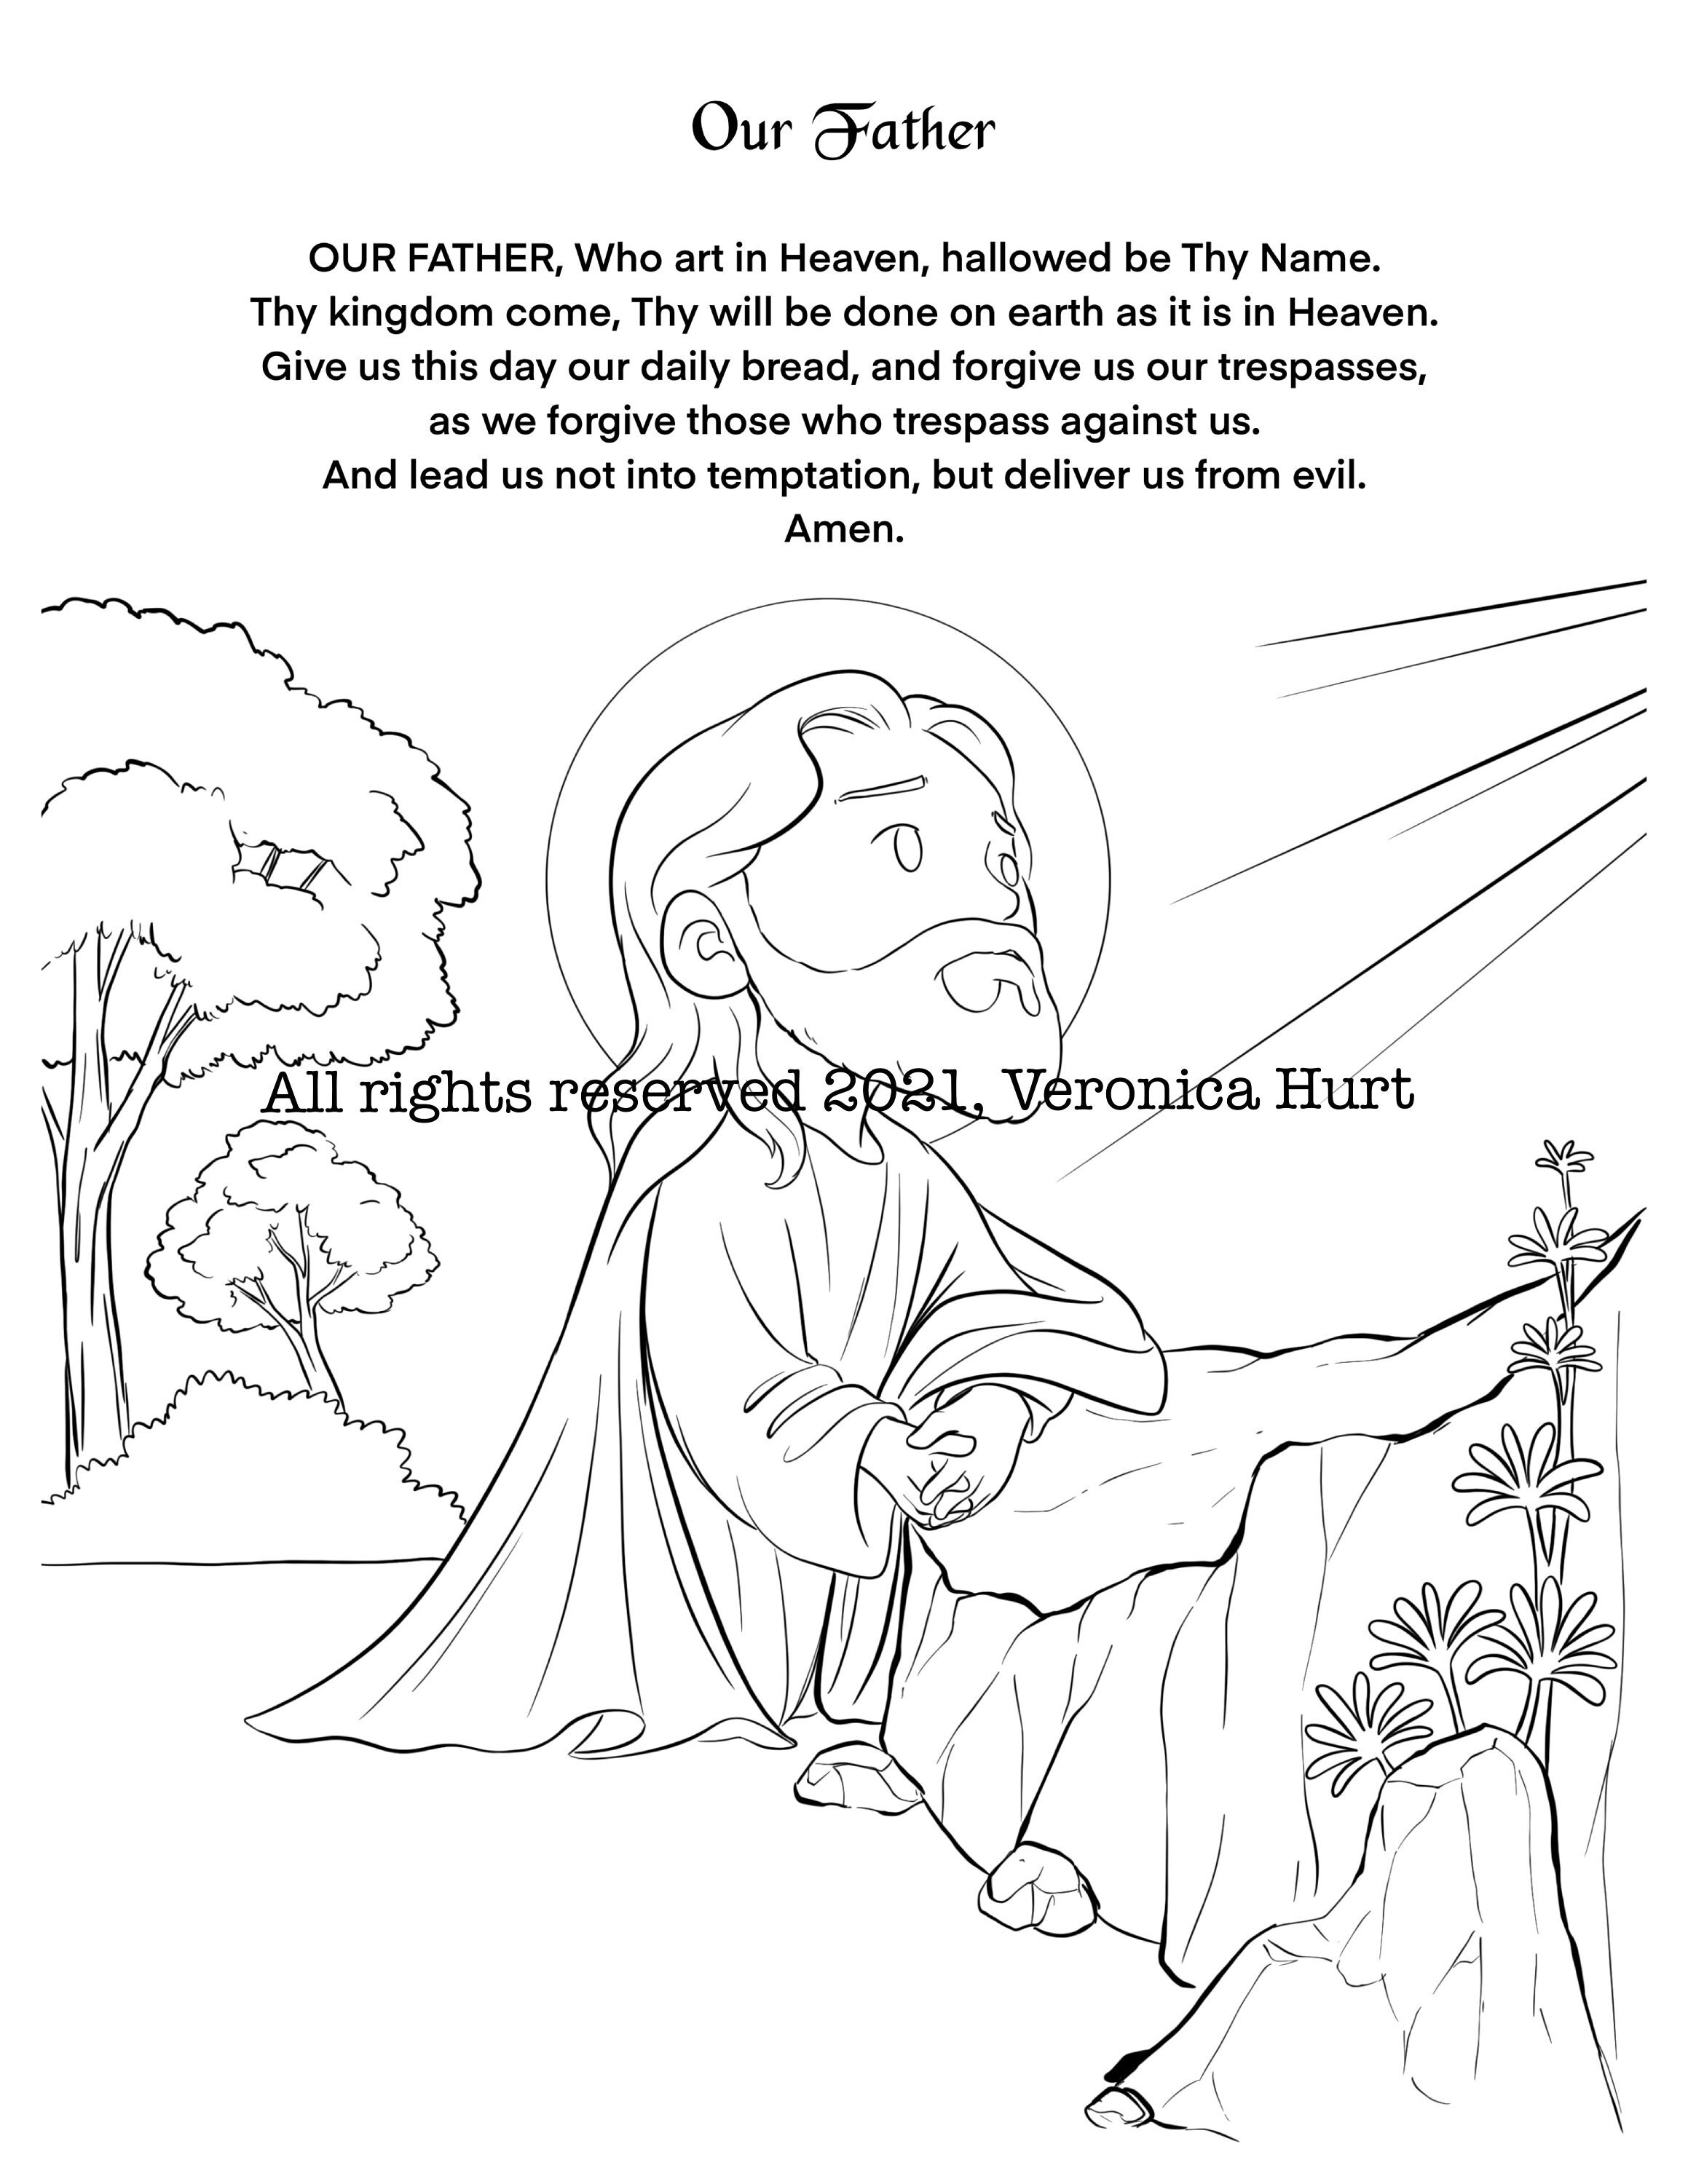 Our father prayer learning resource for kids coloring page activity